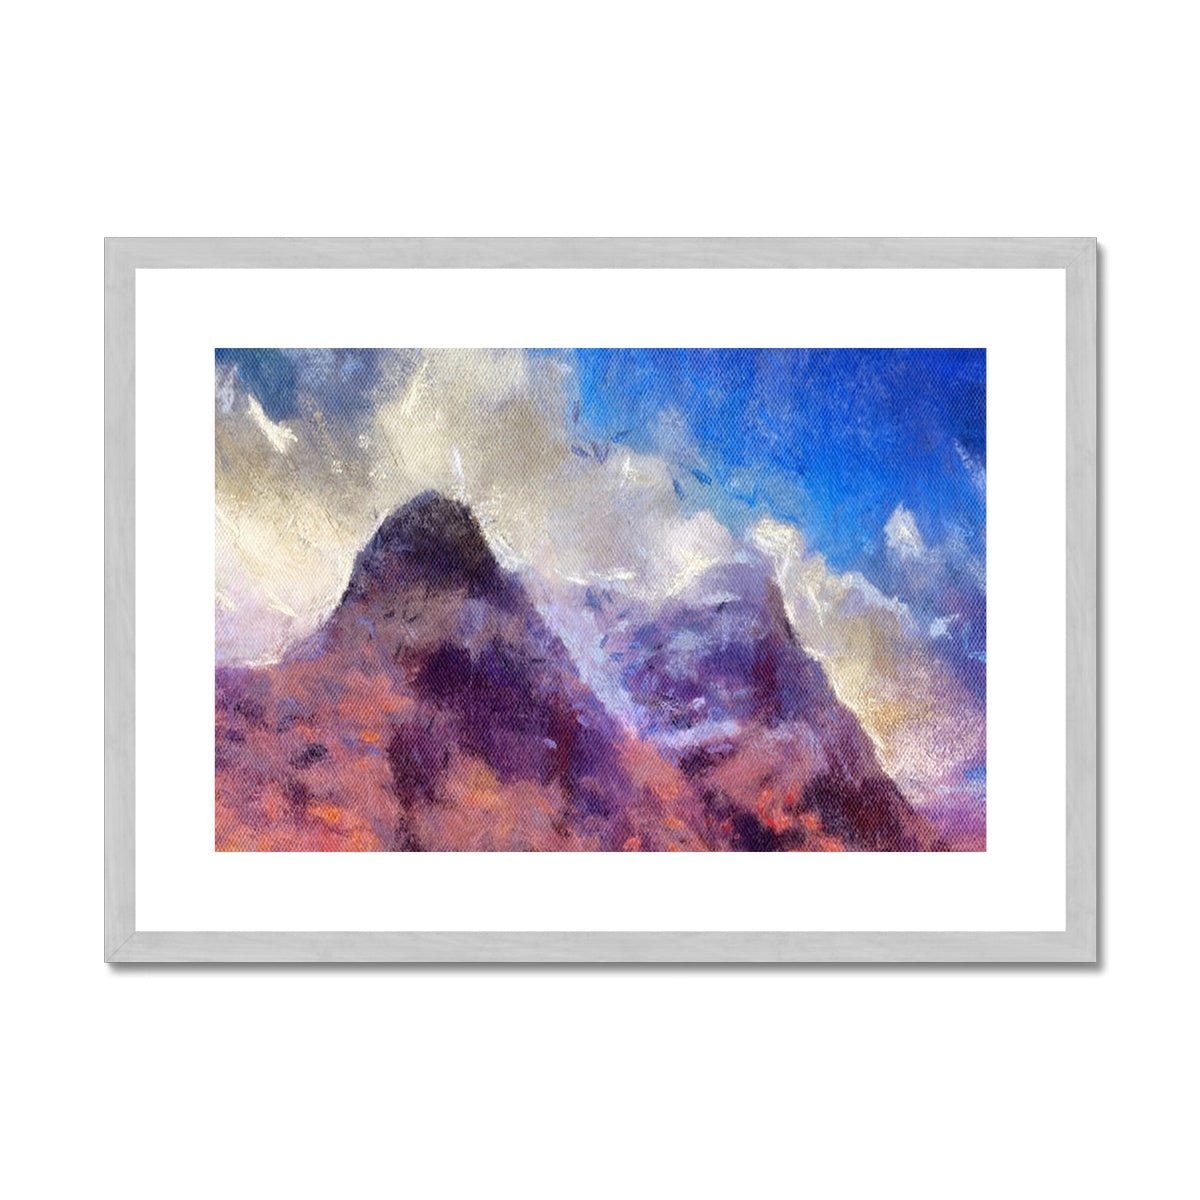 Glencoe Painting | Antique Framed & Mounted Prints From Scotland-Antique Framed & Mounted Prints-Glencoe Art Gallery-A2 Landscape-Silver Frame-Paintings, Prints, Homeware, Art Gifts From Scotland By Scottish Artist Kevin Hunter